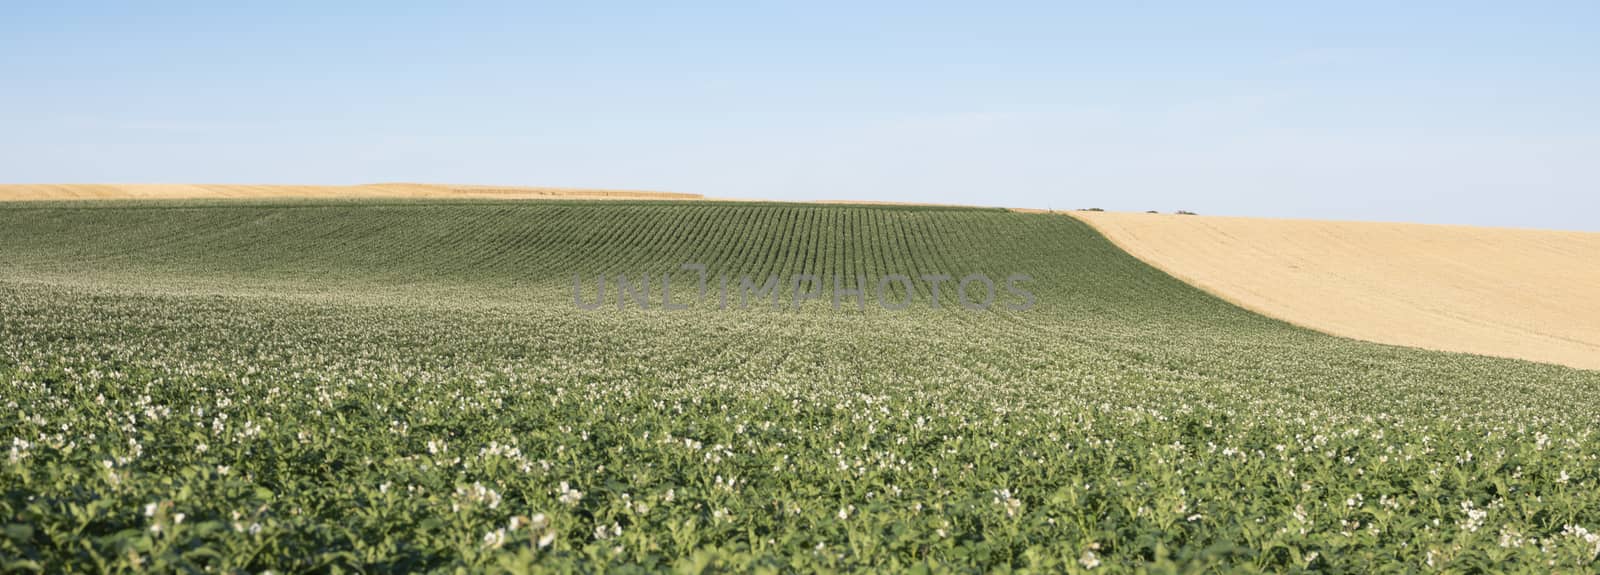 typical almost abstract patterns of agricultural field landscape in the north of france under blue sky with potatoe flowers